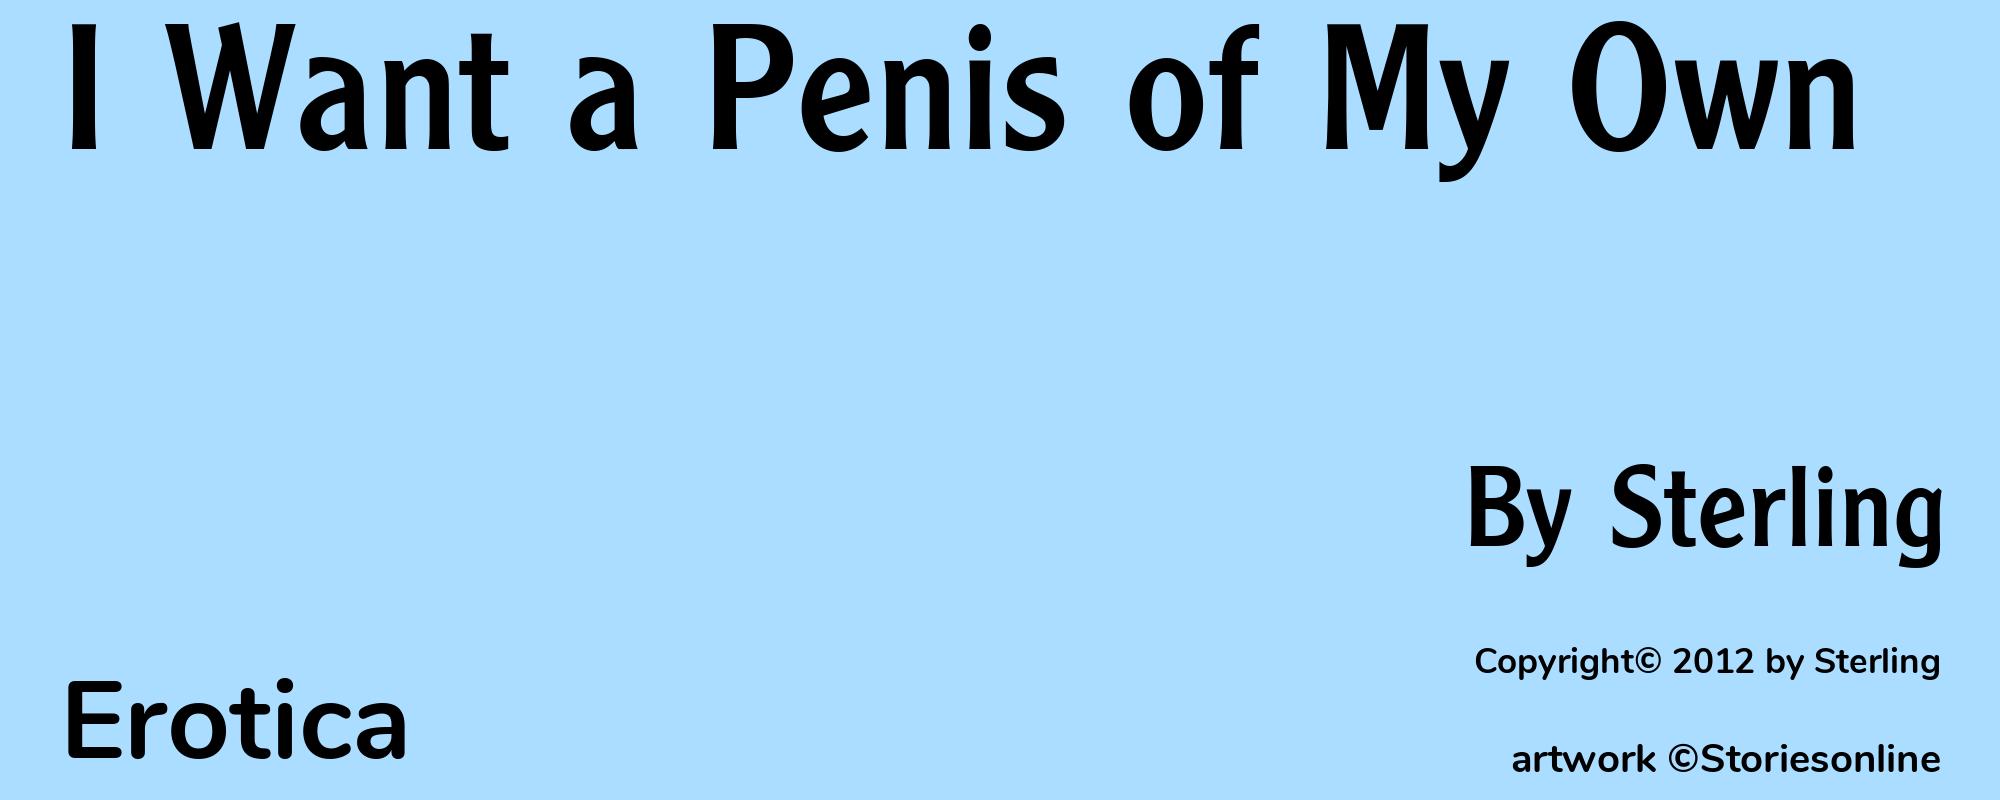 I Want a Penis of My Own - Cover